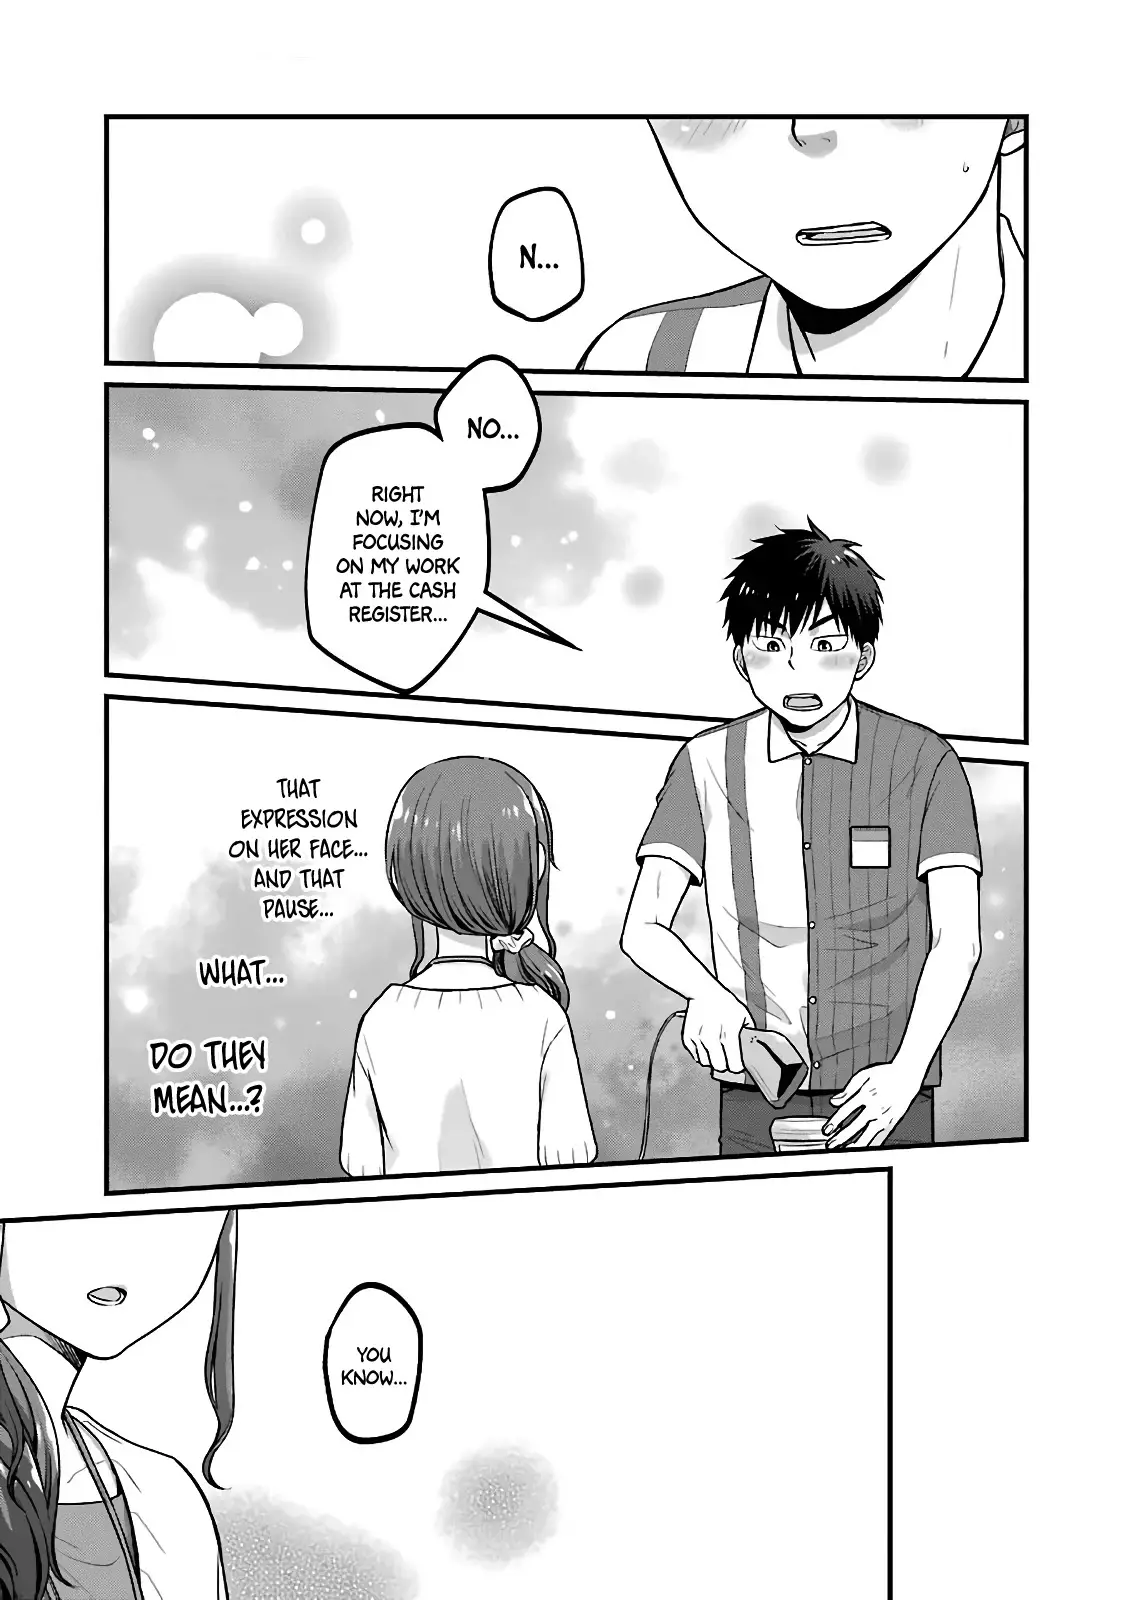 5 Minutes With You At A Convenience Store - 36 page 7